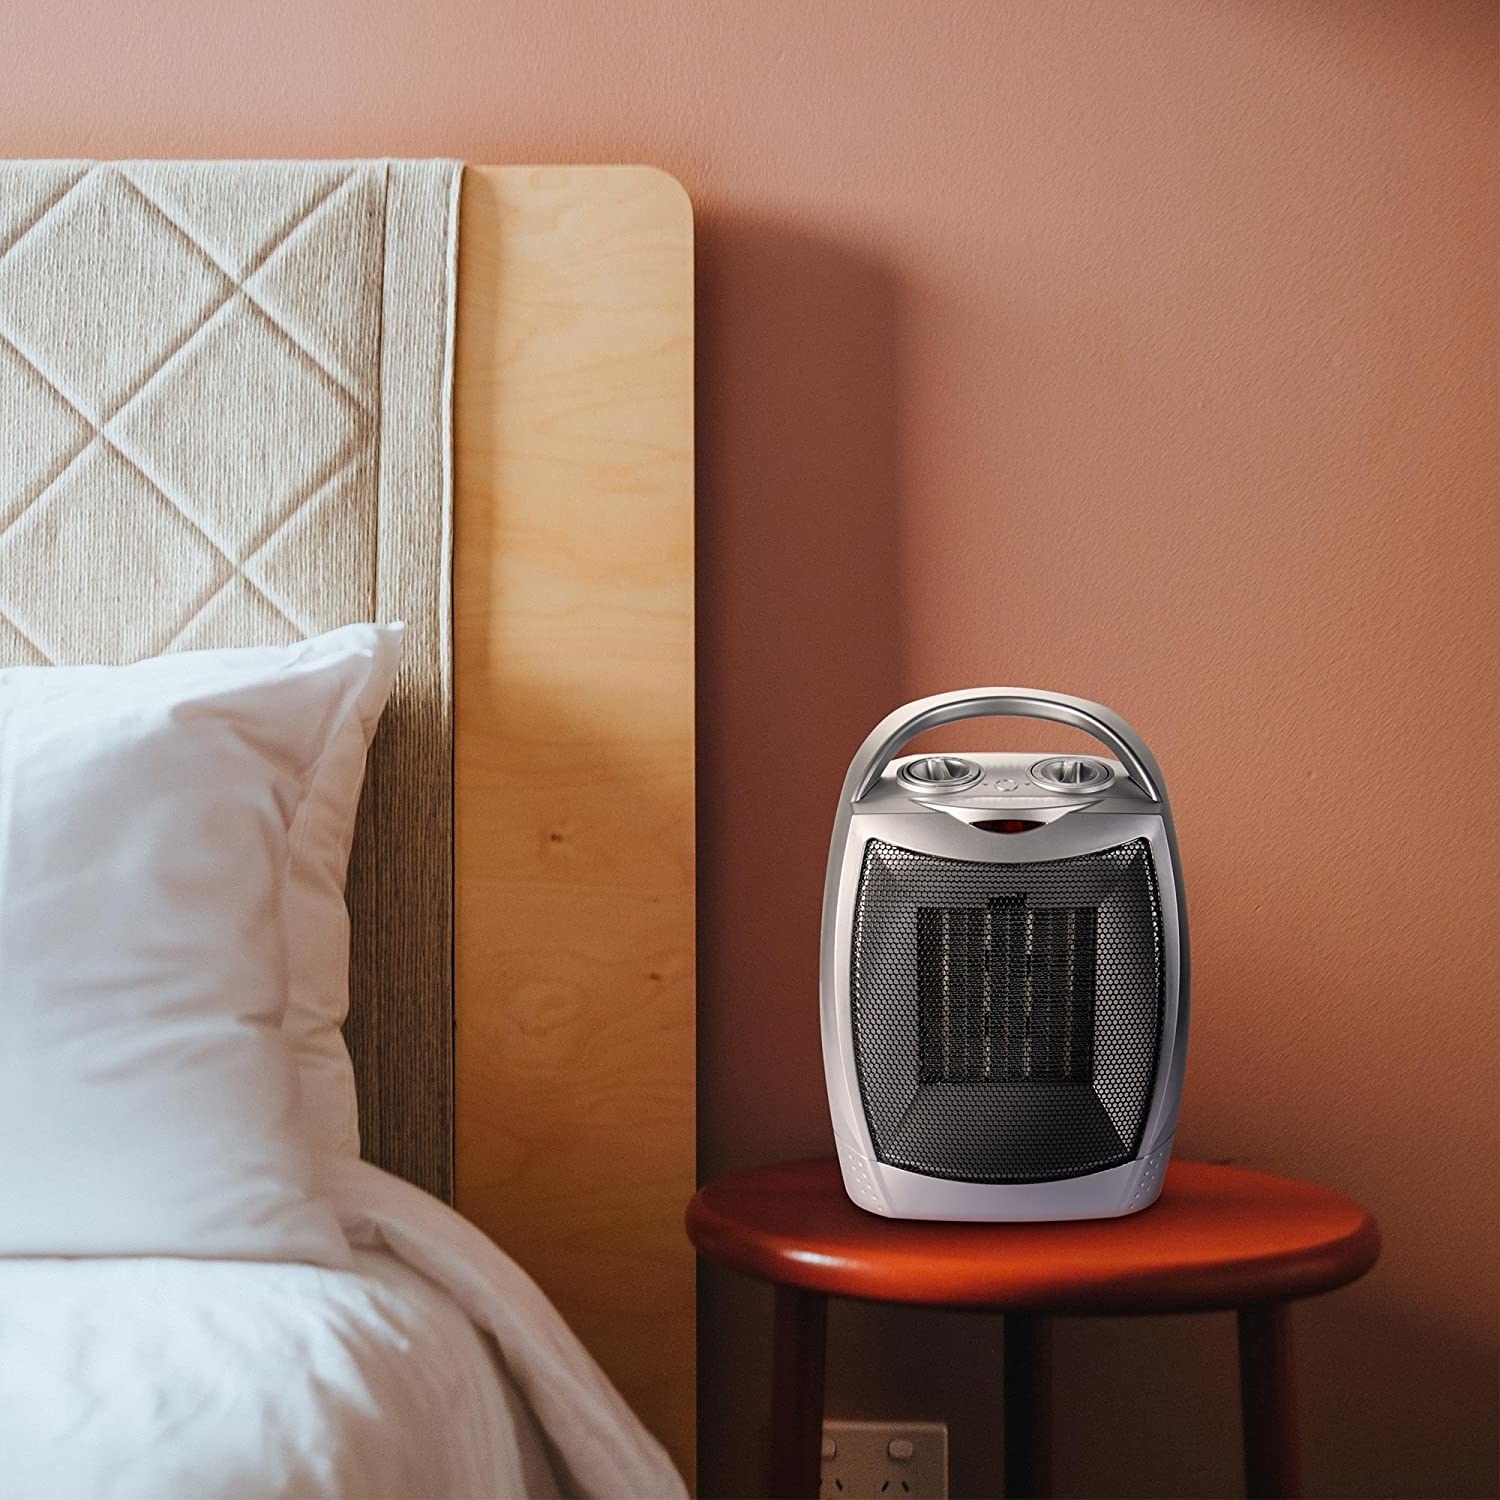 The heater on a bedside table